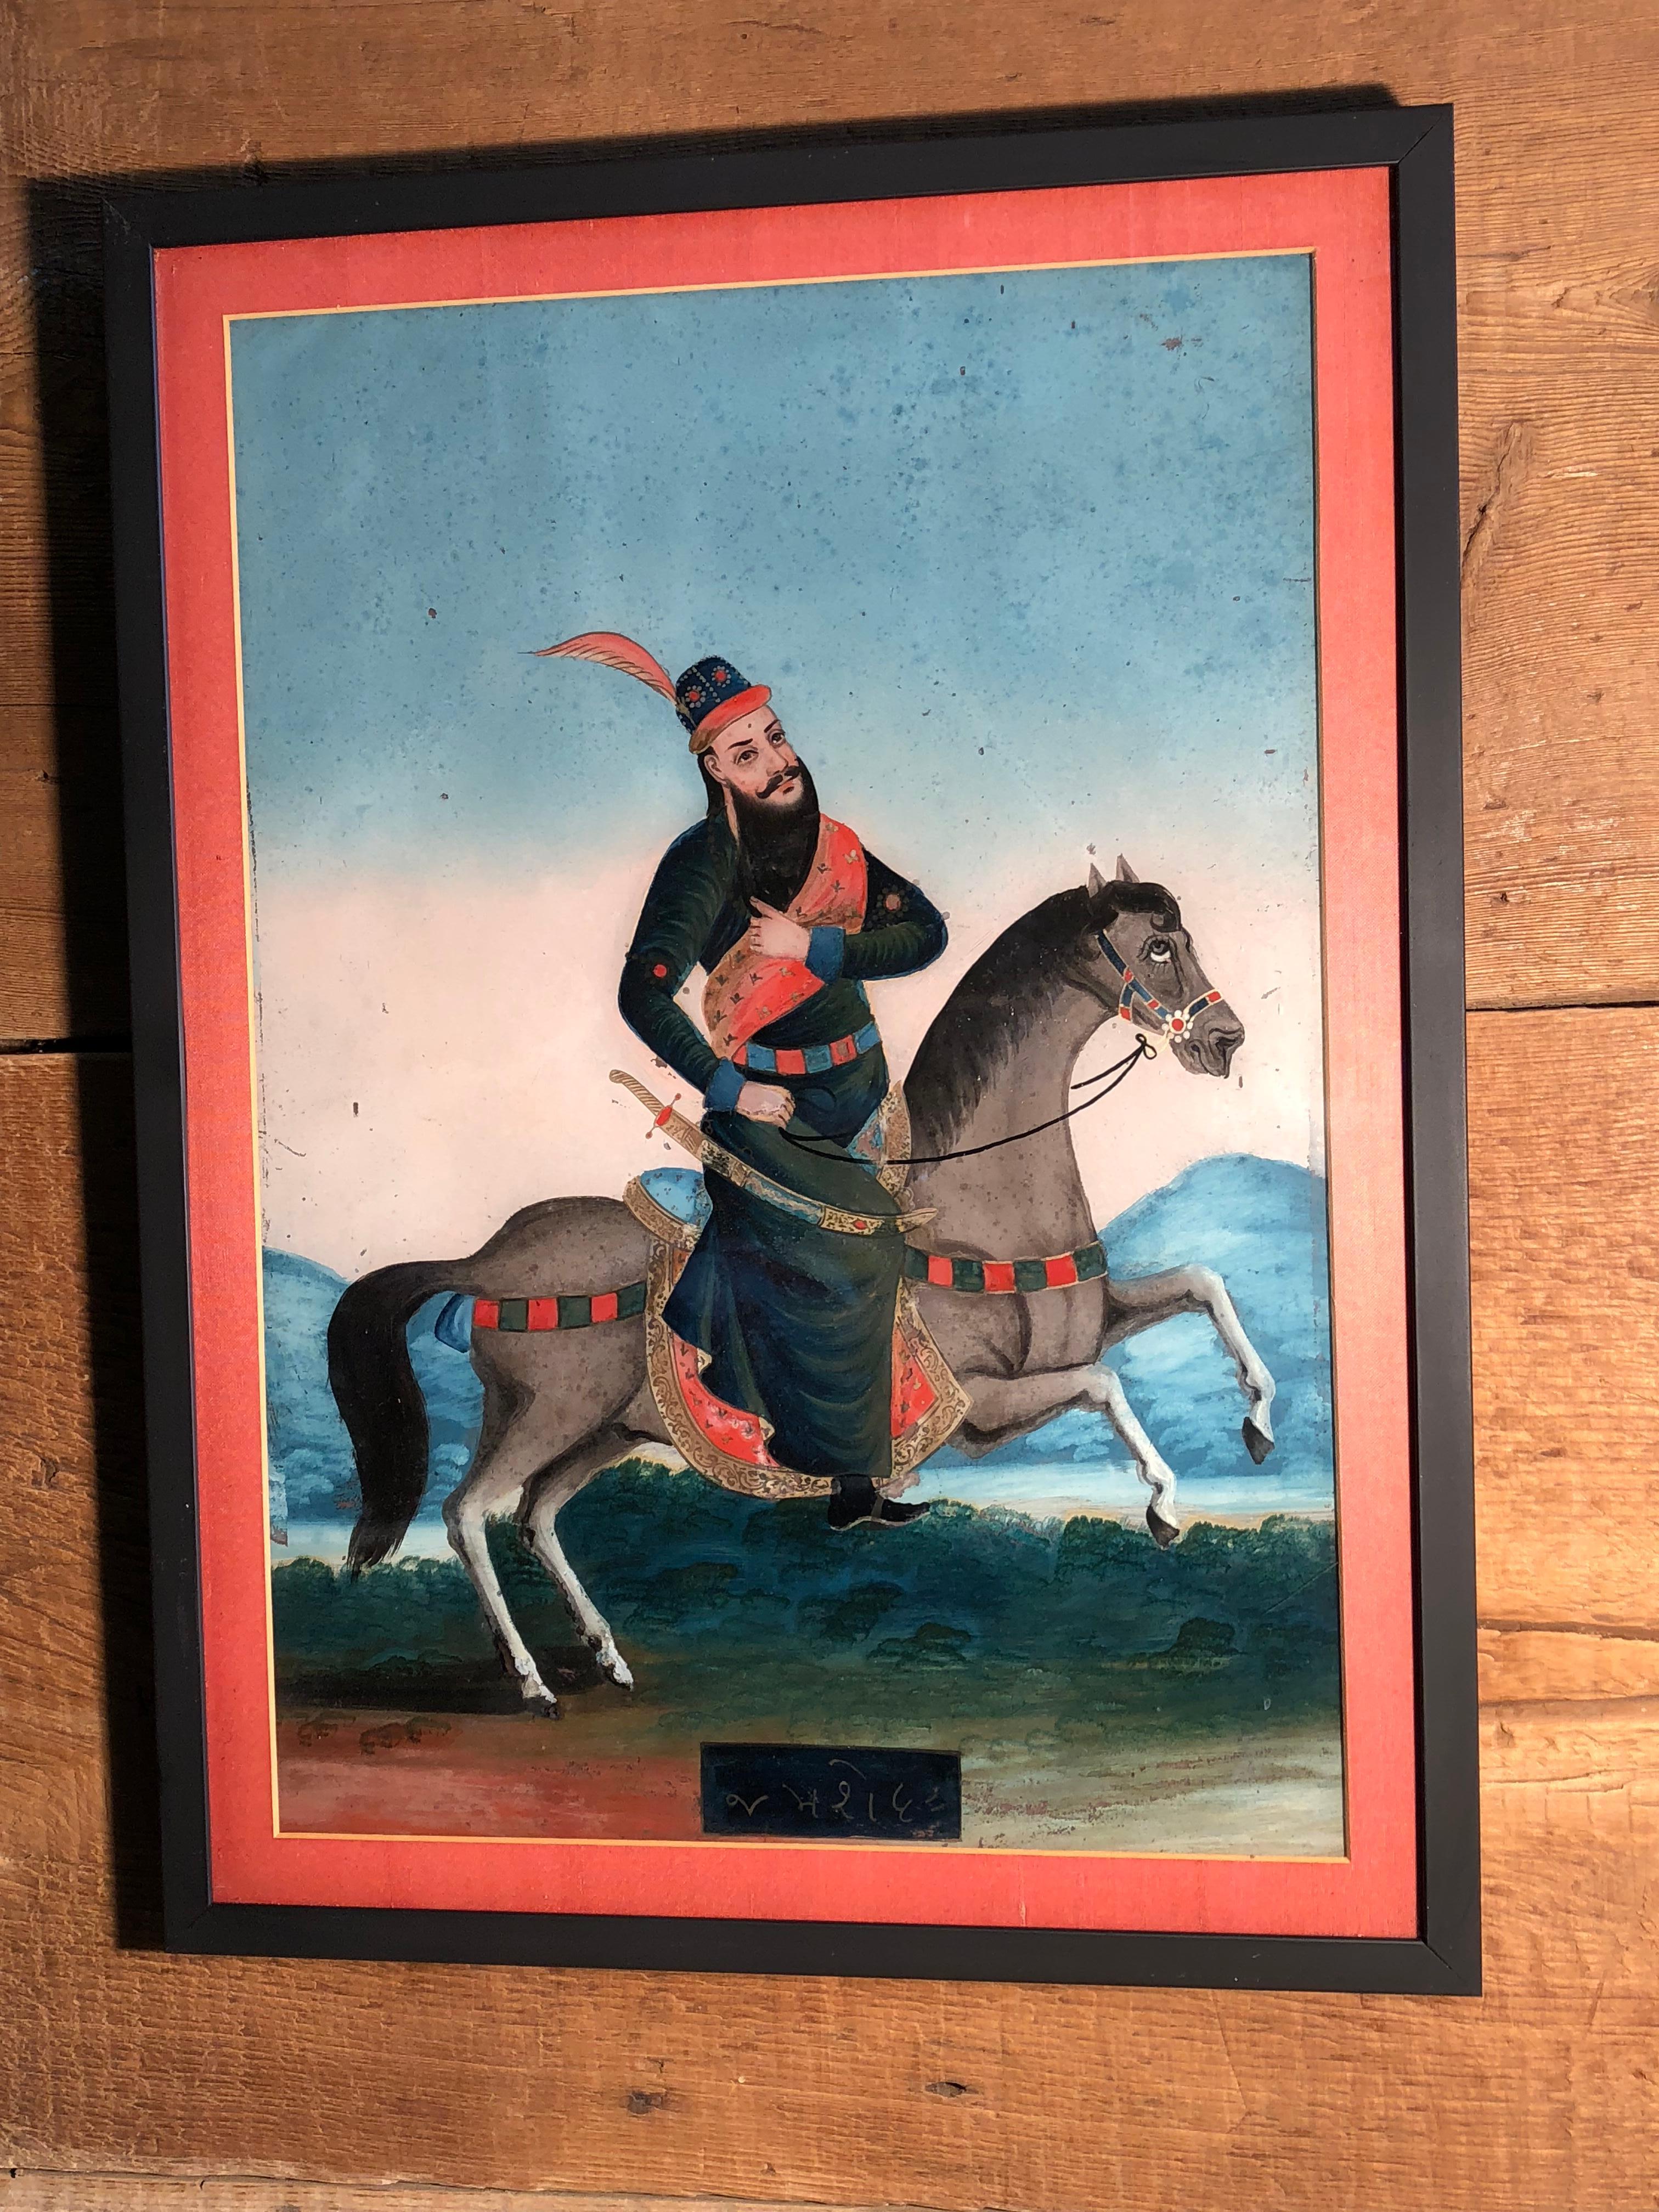 A large églomisé portrait of a Moghul prince on horseback, in a landscape, early 19th century, Rajasthan, India. These large portraits are very rare due to age and fragility.